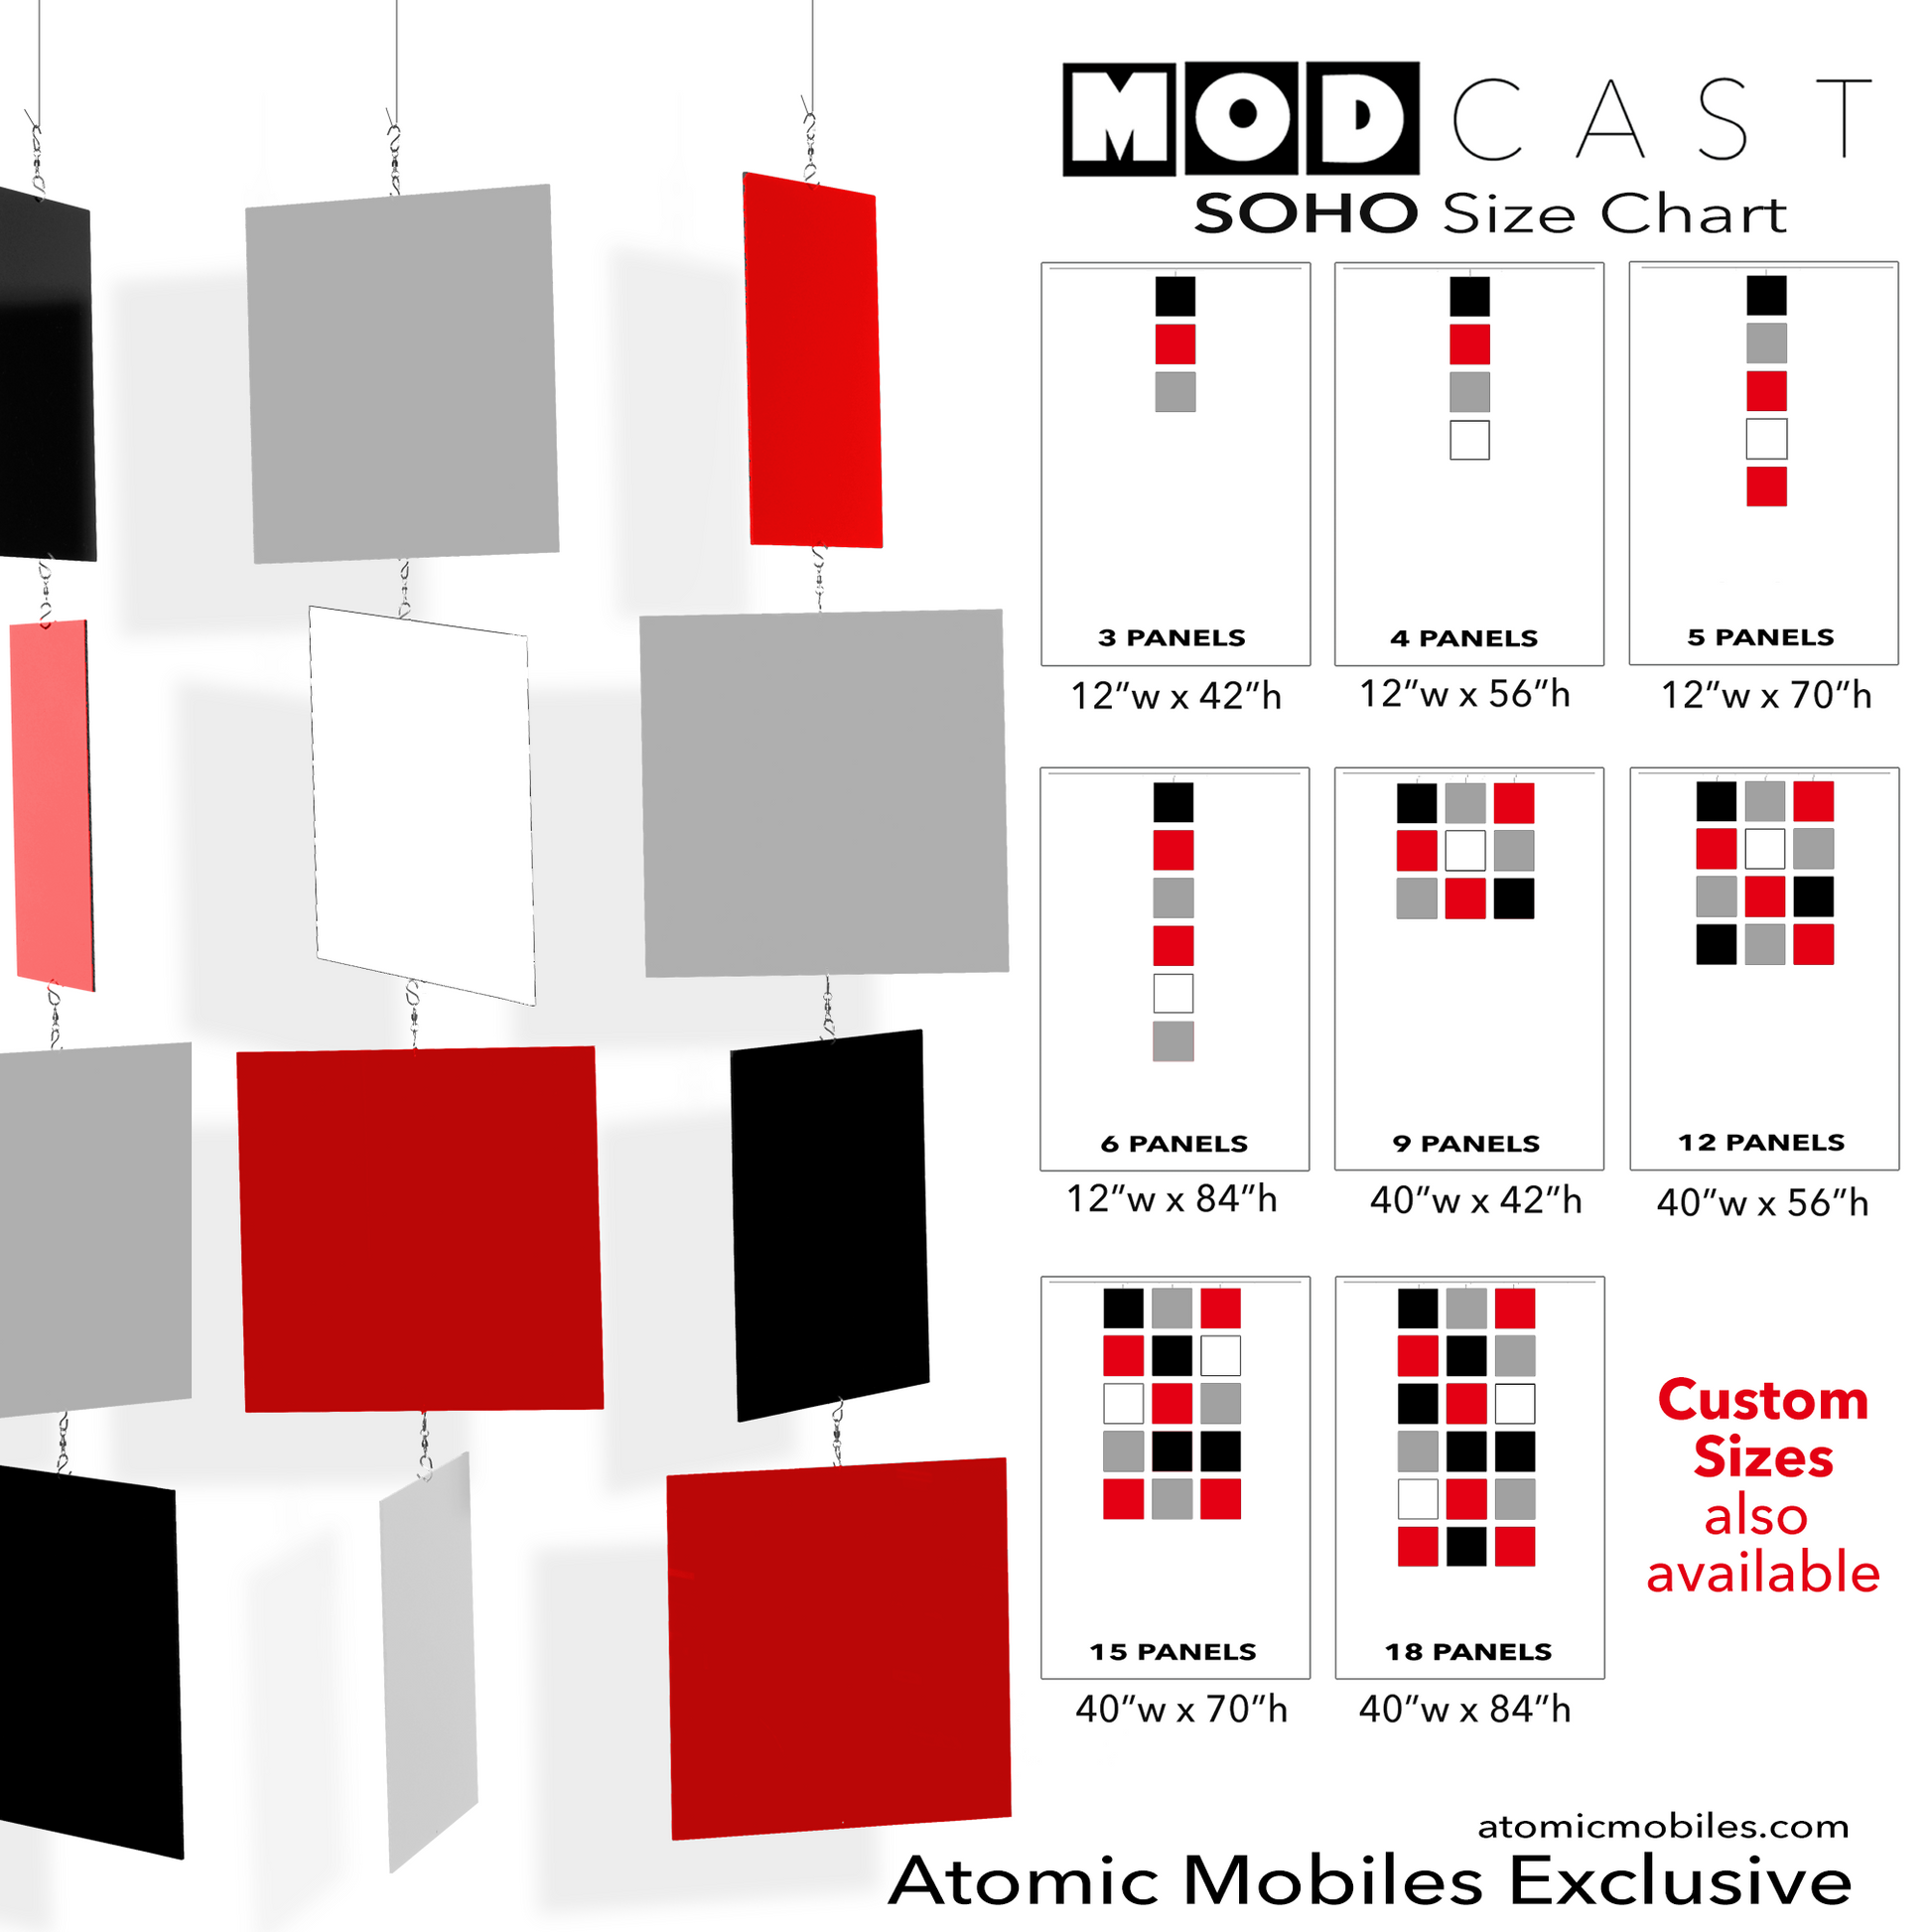 Soho MODcast kinetic hanging art mobiles in Black, Red, Gray, and White acrylic plexiglass panels - mid century modern style home decor by AtomicMobiles.com